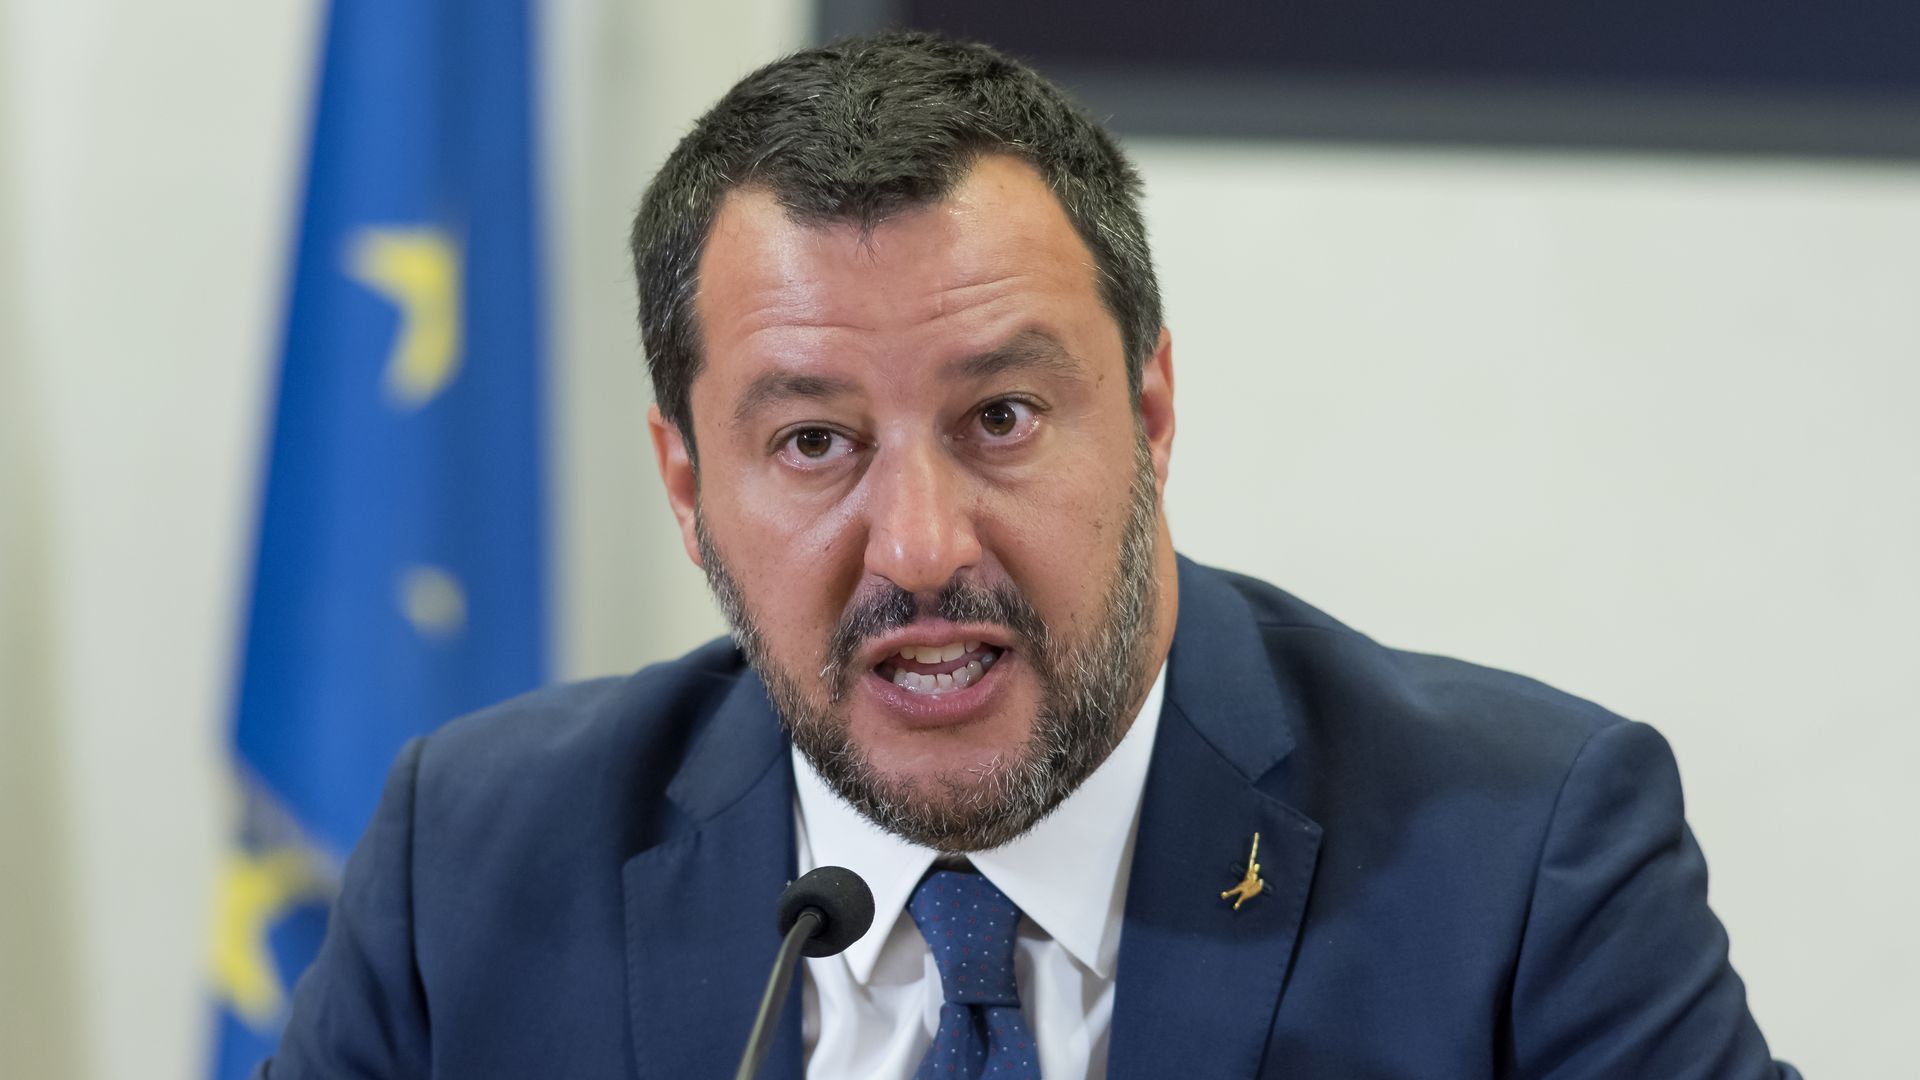 Italy's Salvini embroiled in Russian scheme to aid League party